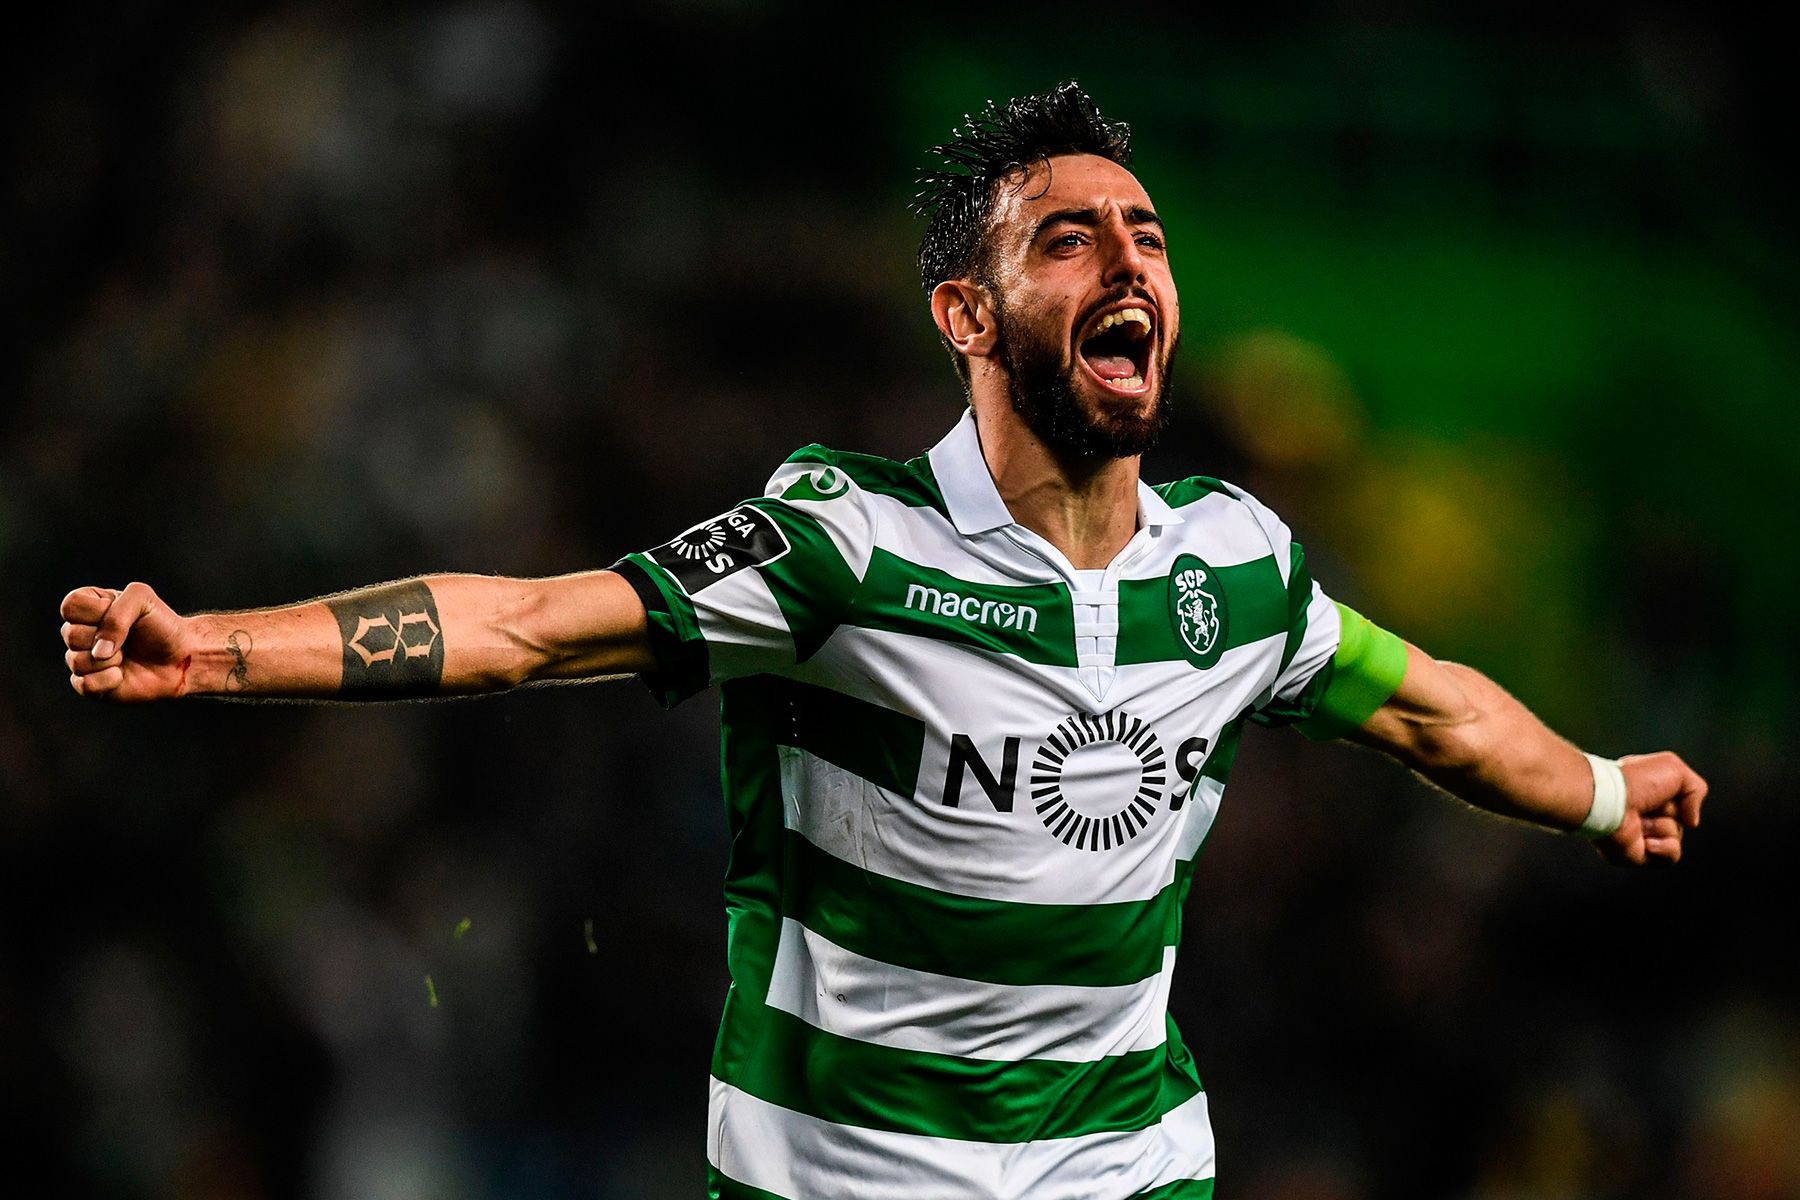 Bruno Fernandes celebrates a goal with the Sporting